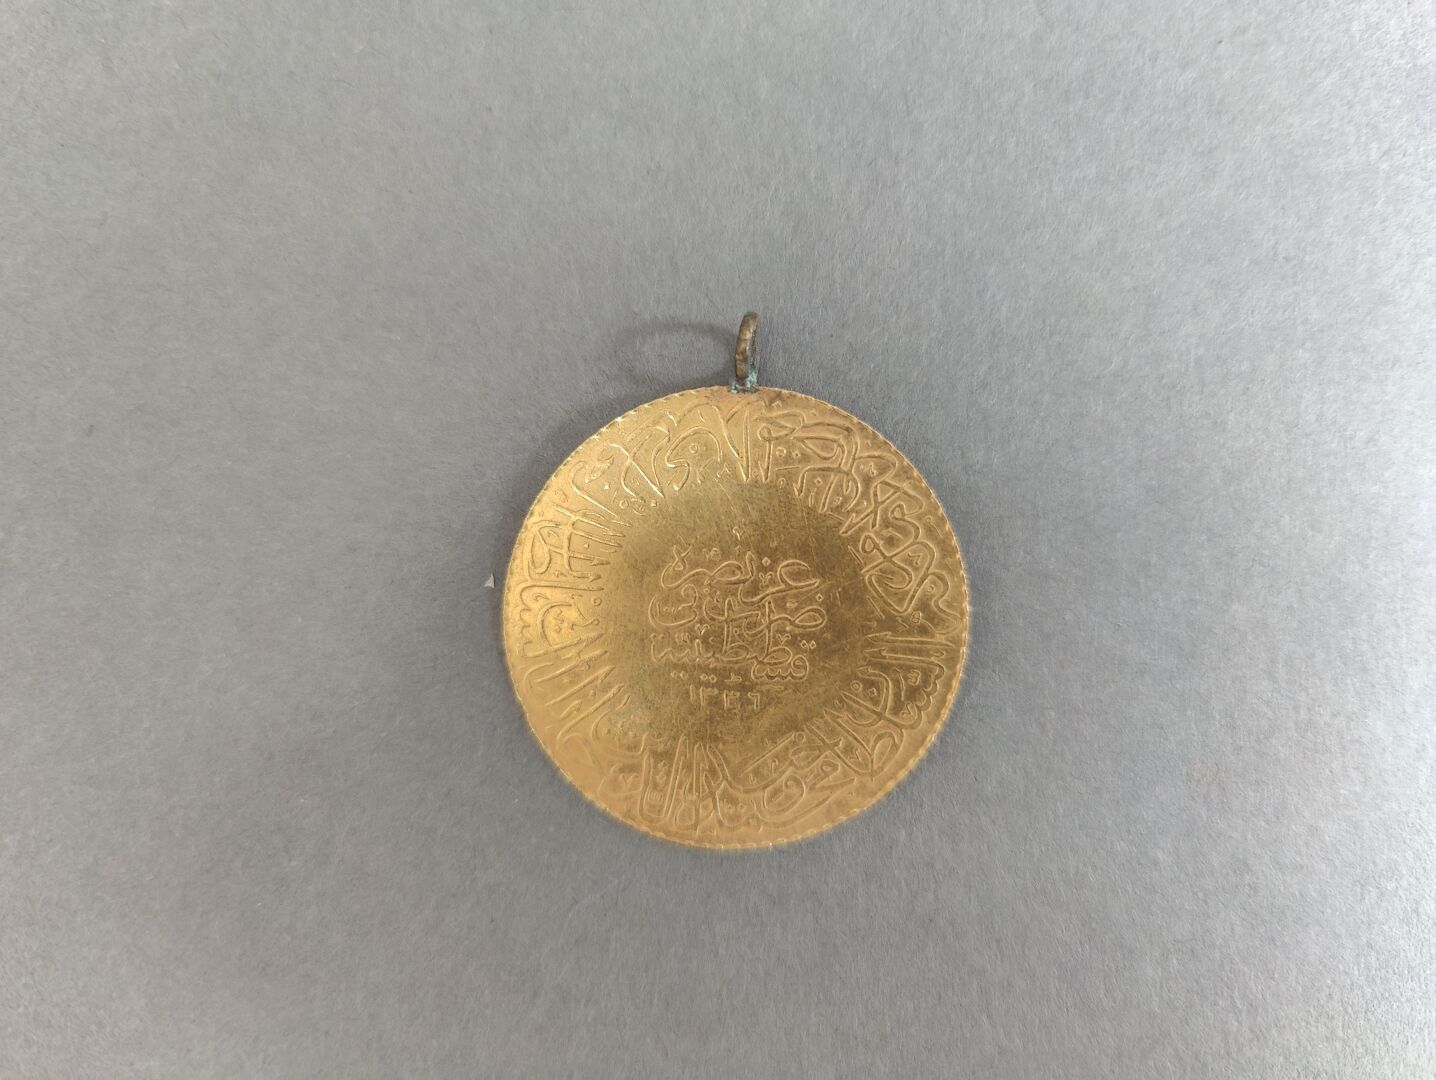 Null Turkish gold coin
mounted as a pendant
Weight: 6.96 g